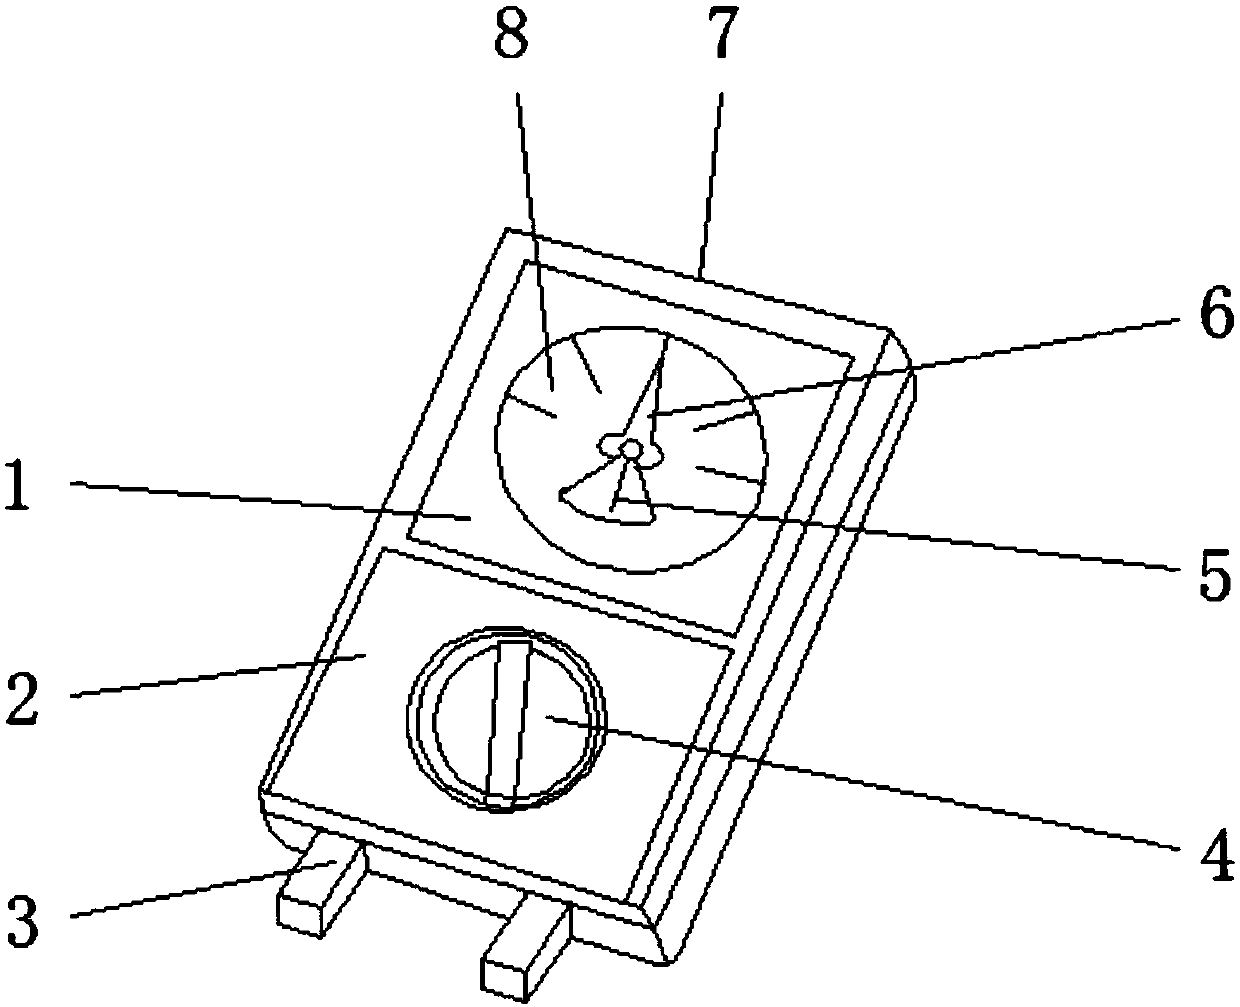 Coaxial double-pointer electrical instrument